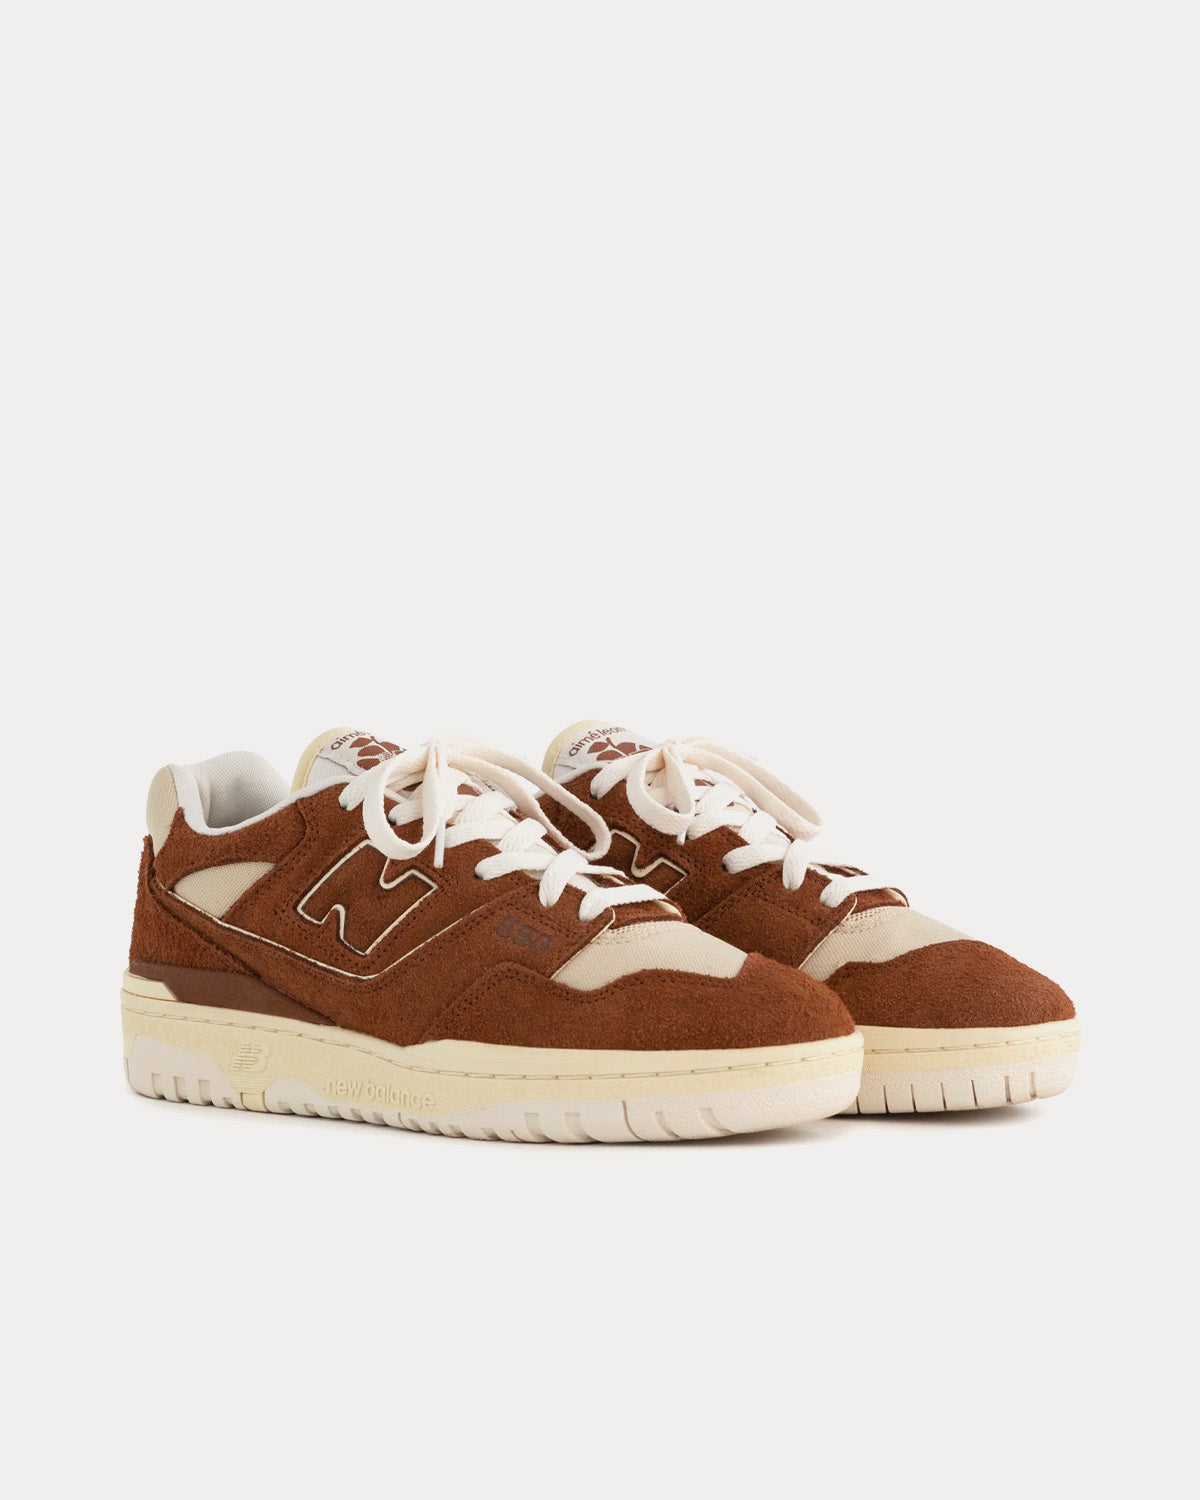 New Balance x Aime Leon Dore - P550 Basketball Oxfords Brown Low Top Sneakers